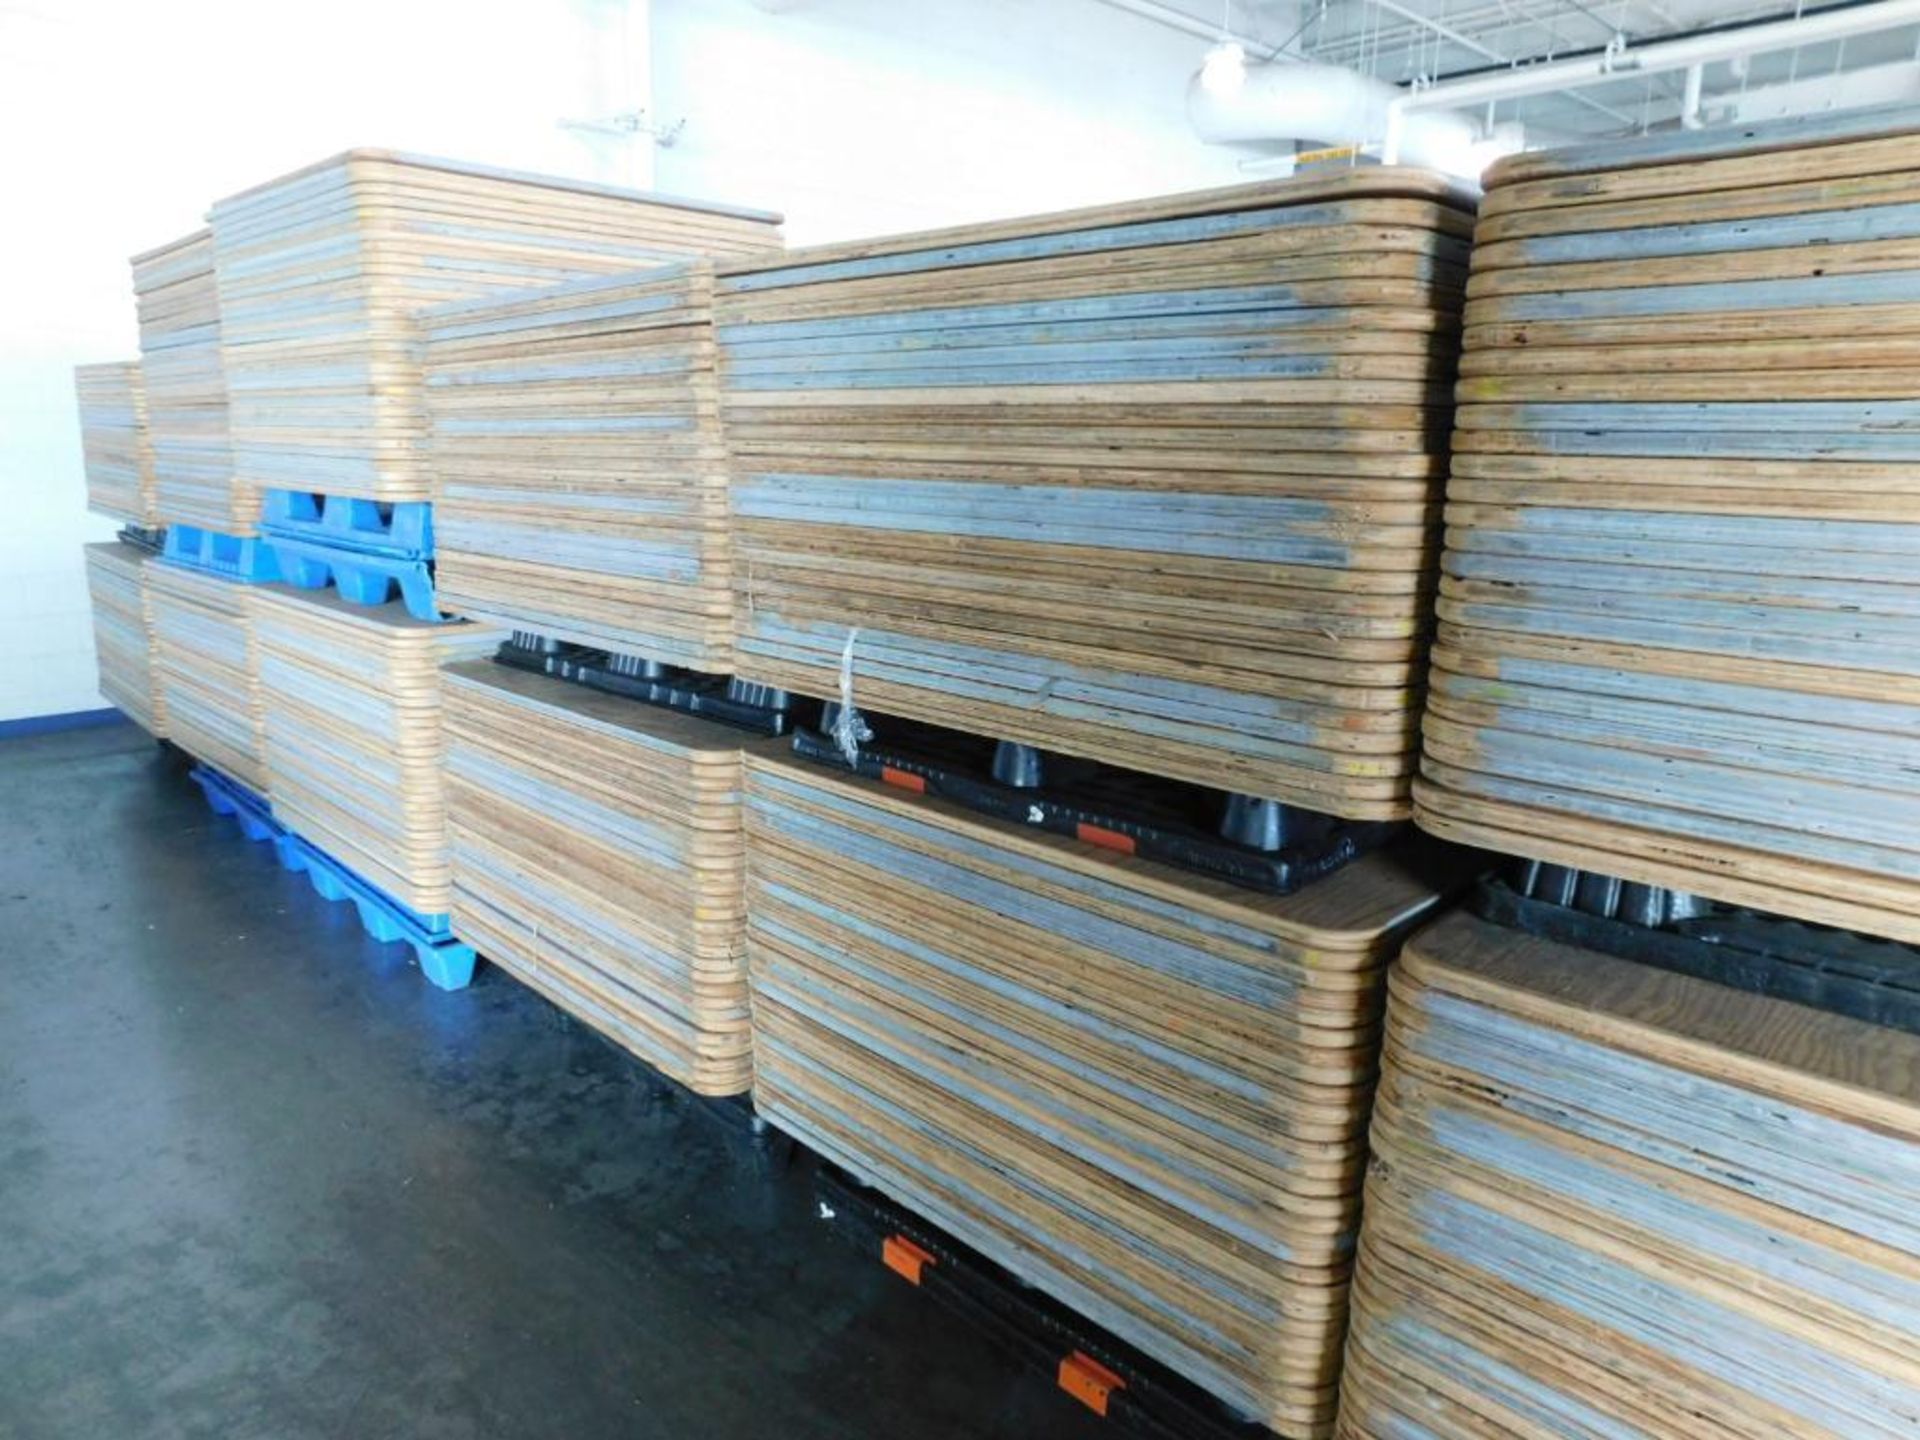 LOT: Large Quantity of 50" x 50" Wood Paper Roll Pallets on (12) Plastic Pallets (LOCATION: IN MAIL - Image 2 of 7